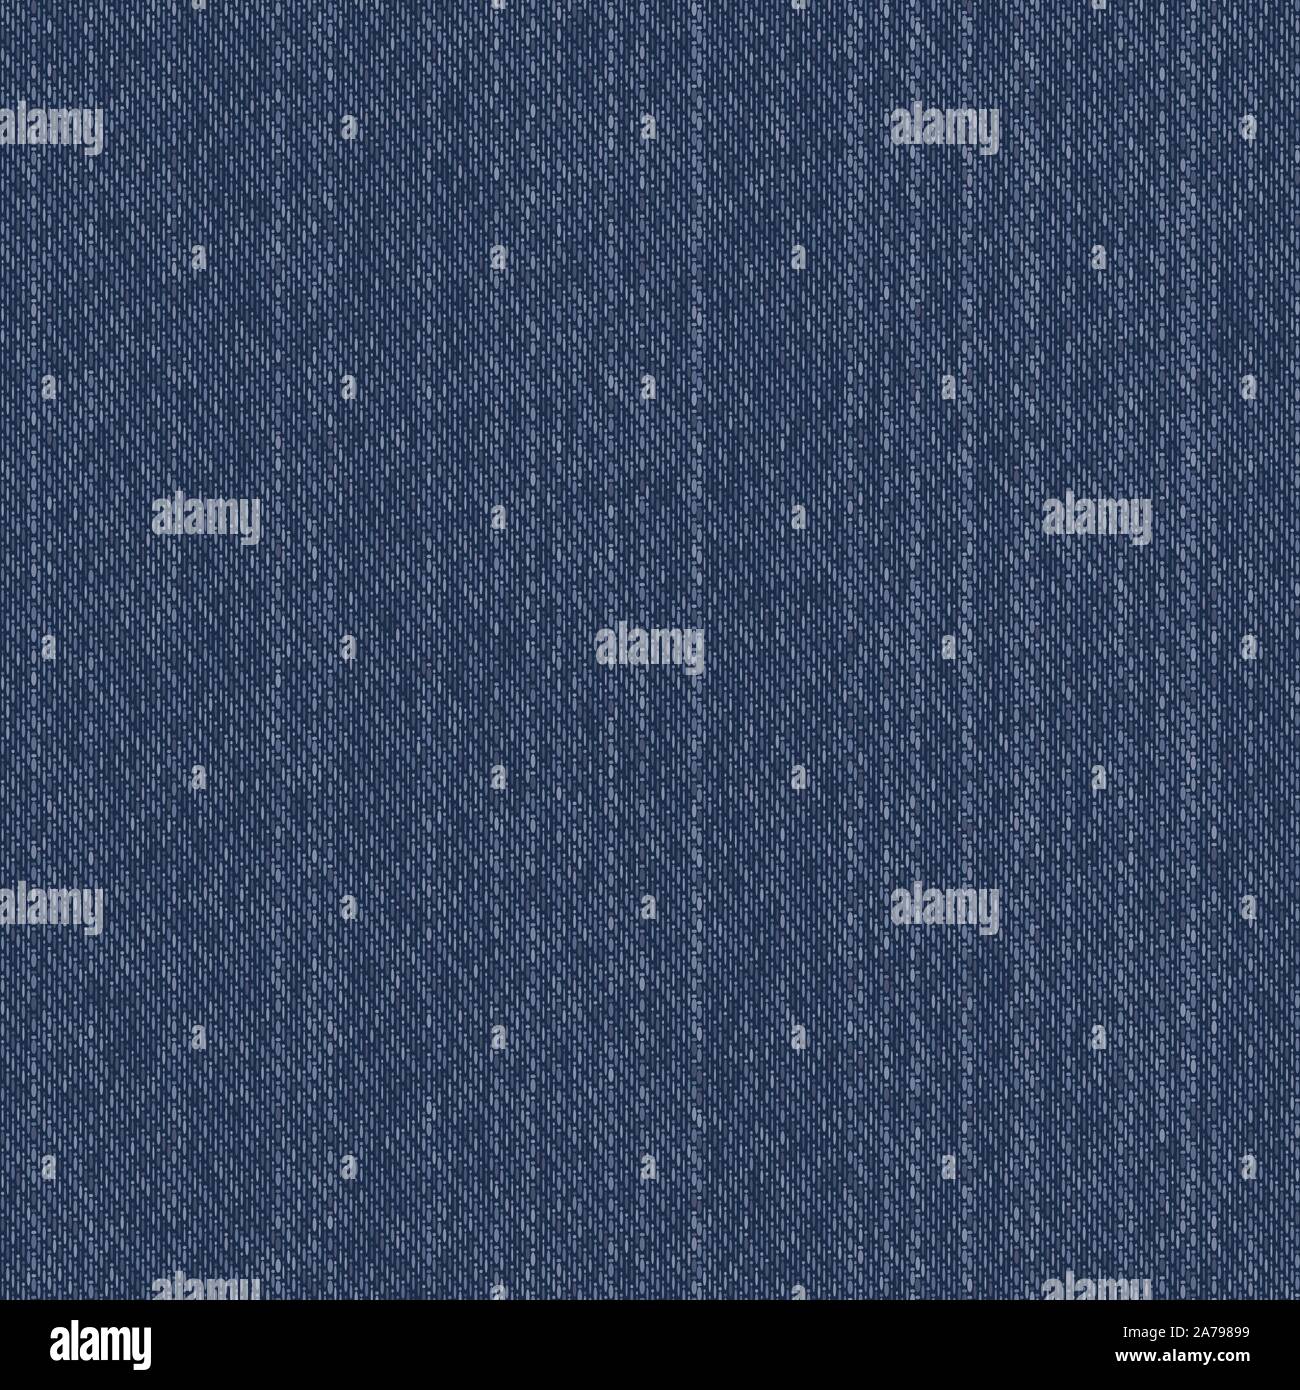 Denim Fabric Texture Seamless Repeat Vector Pattern Swatch. Traditional ...